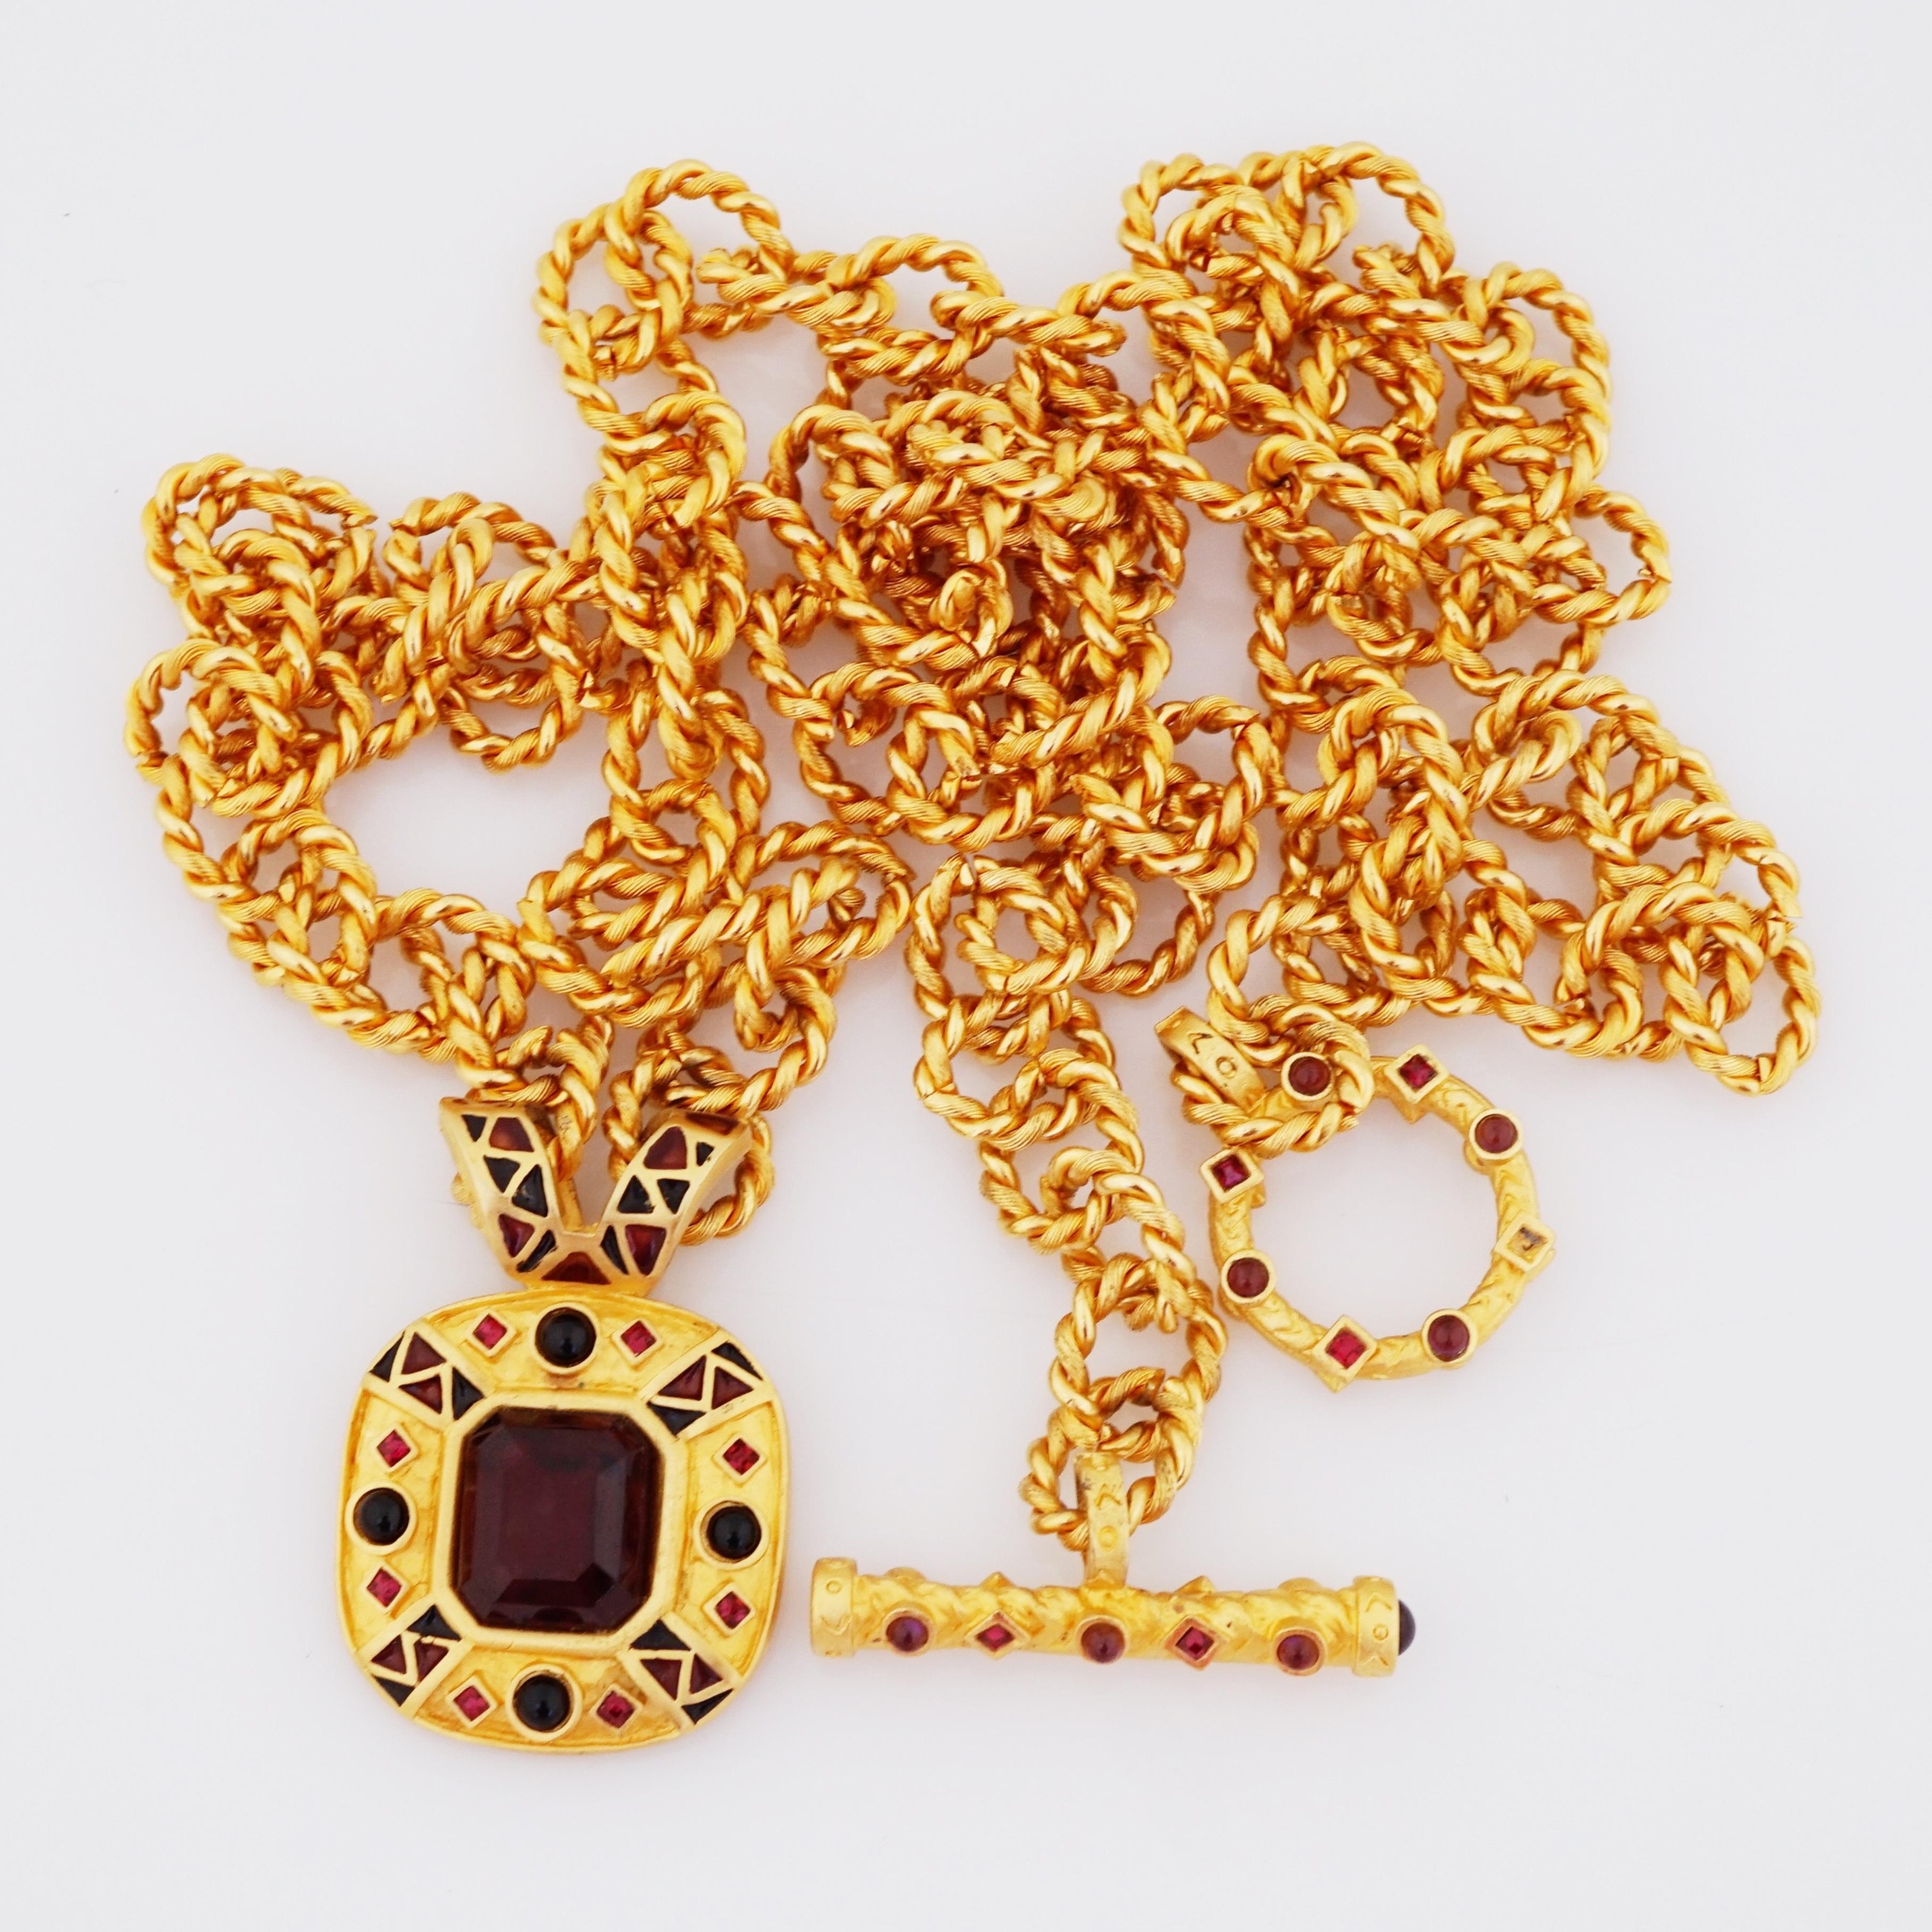 Modern Chunky Satin Gilt Chain Necklace w/ Ruby Crystal Pendant By Leslie Block, 1980s For Sale